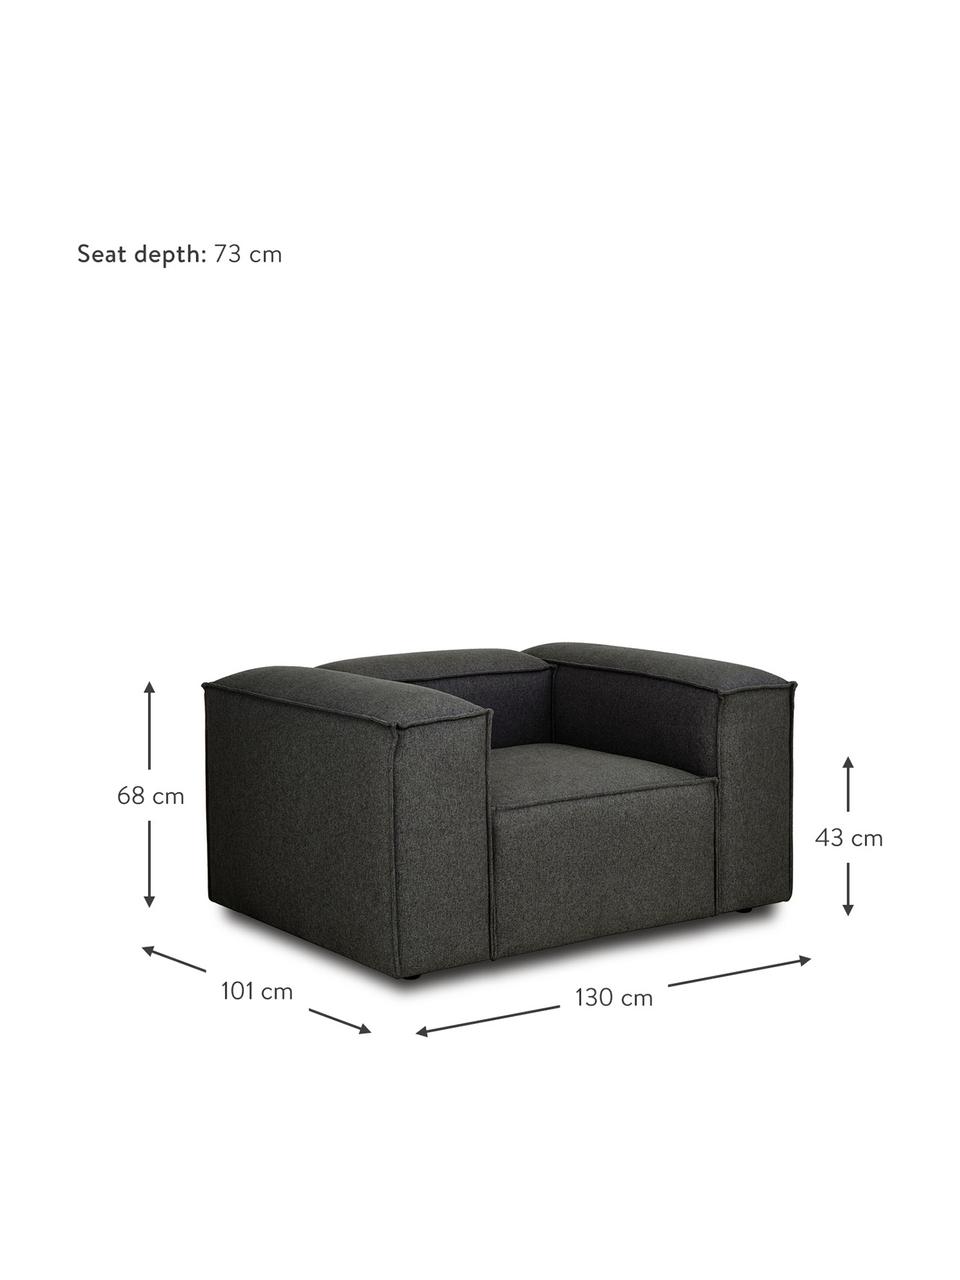 Fauteuil anthracite Lennon, Tissu anthracite